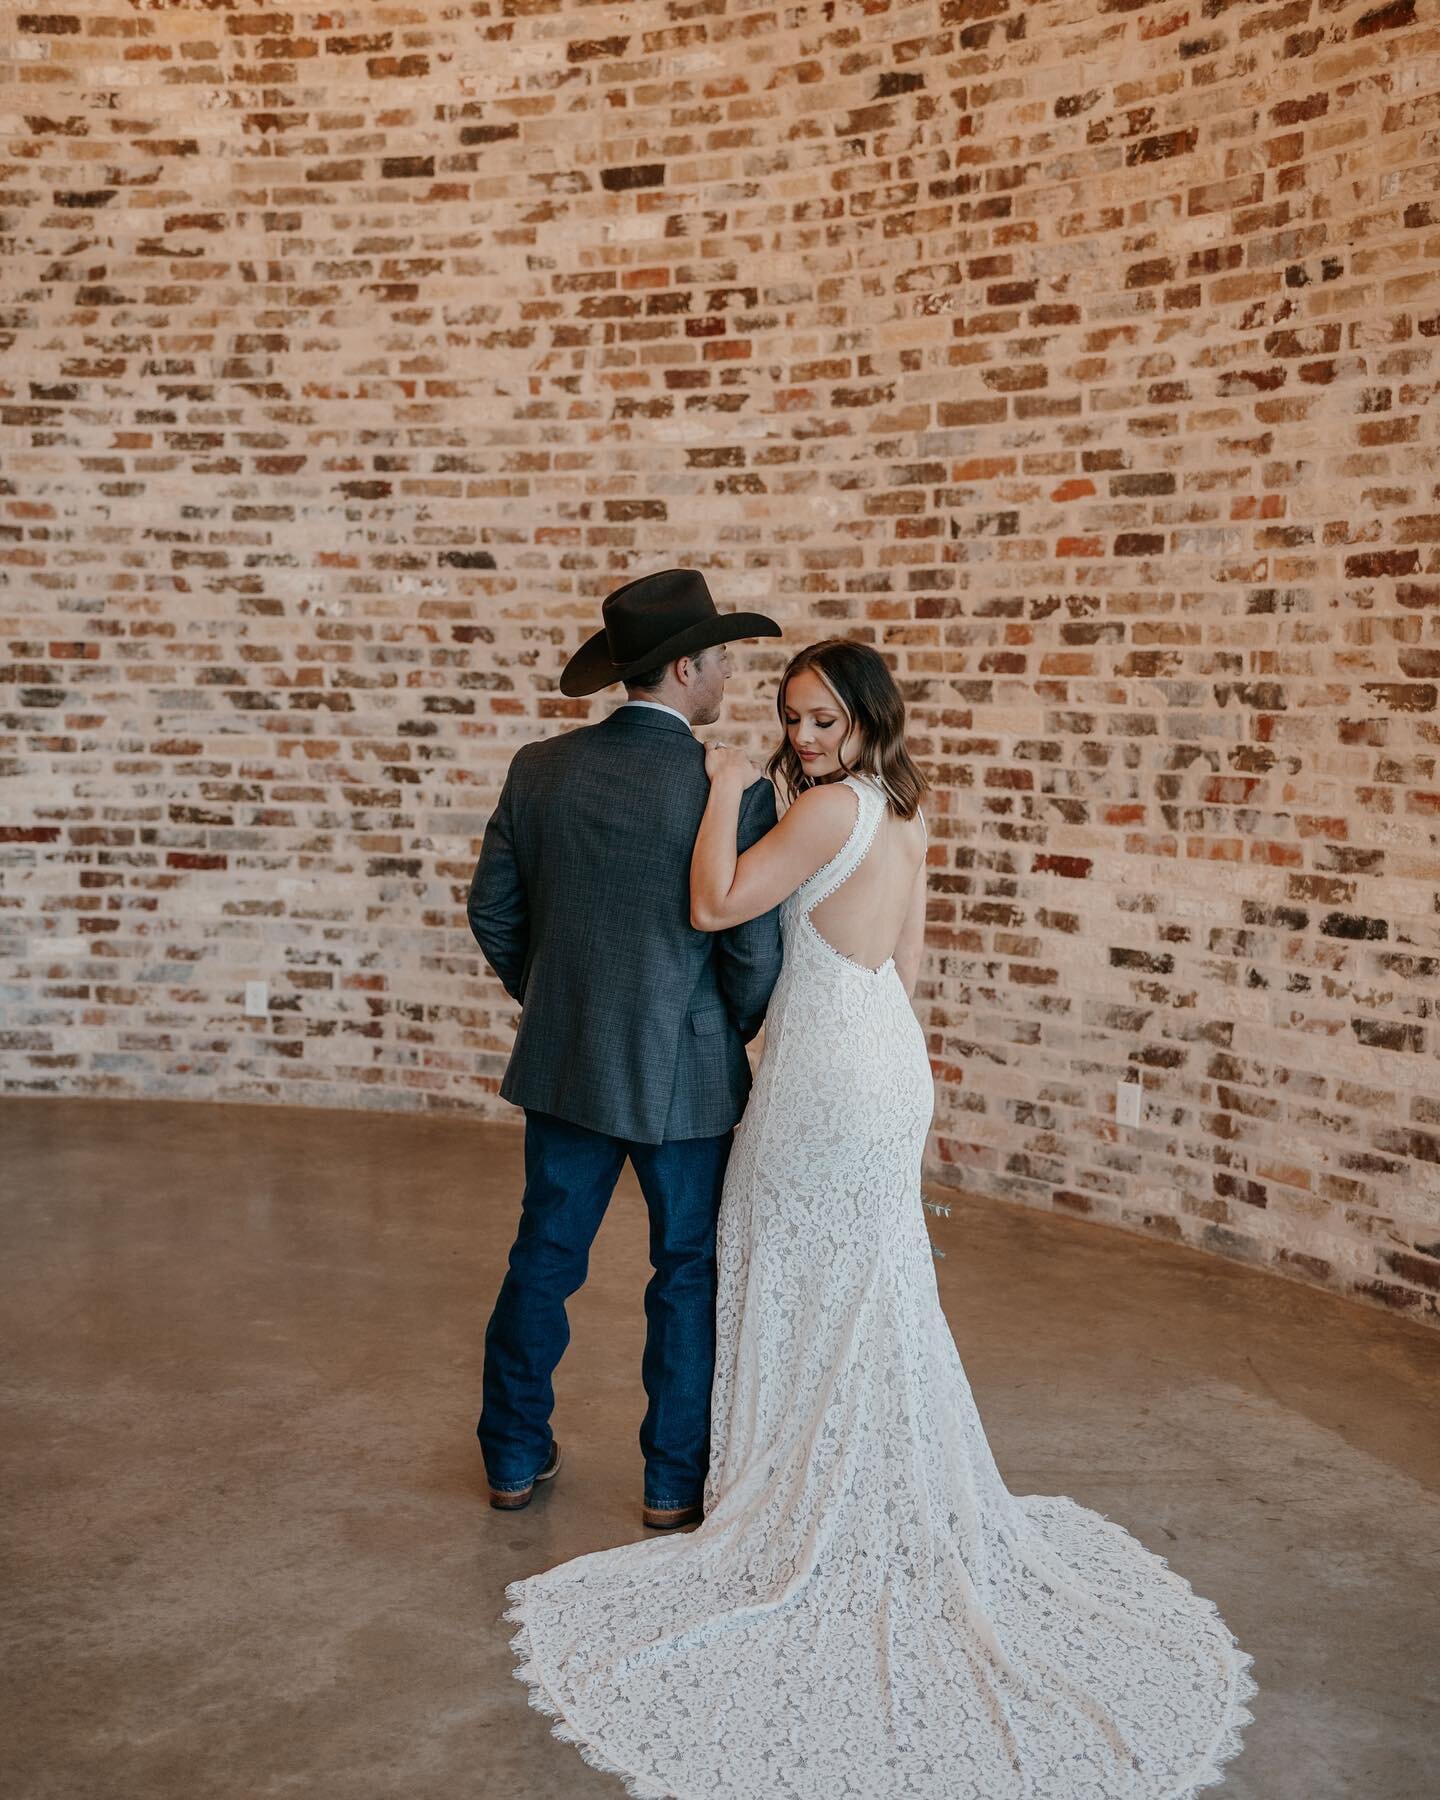 This dang Instagram crop kills me! I am going to post the full image to my story so you can see the full dress and all it glory. These two are just amazing ! 

Venue: @rusticgraceestate 
Makeup: @kristenfarrah_makeup 
Hair: @glossedxsarah